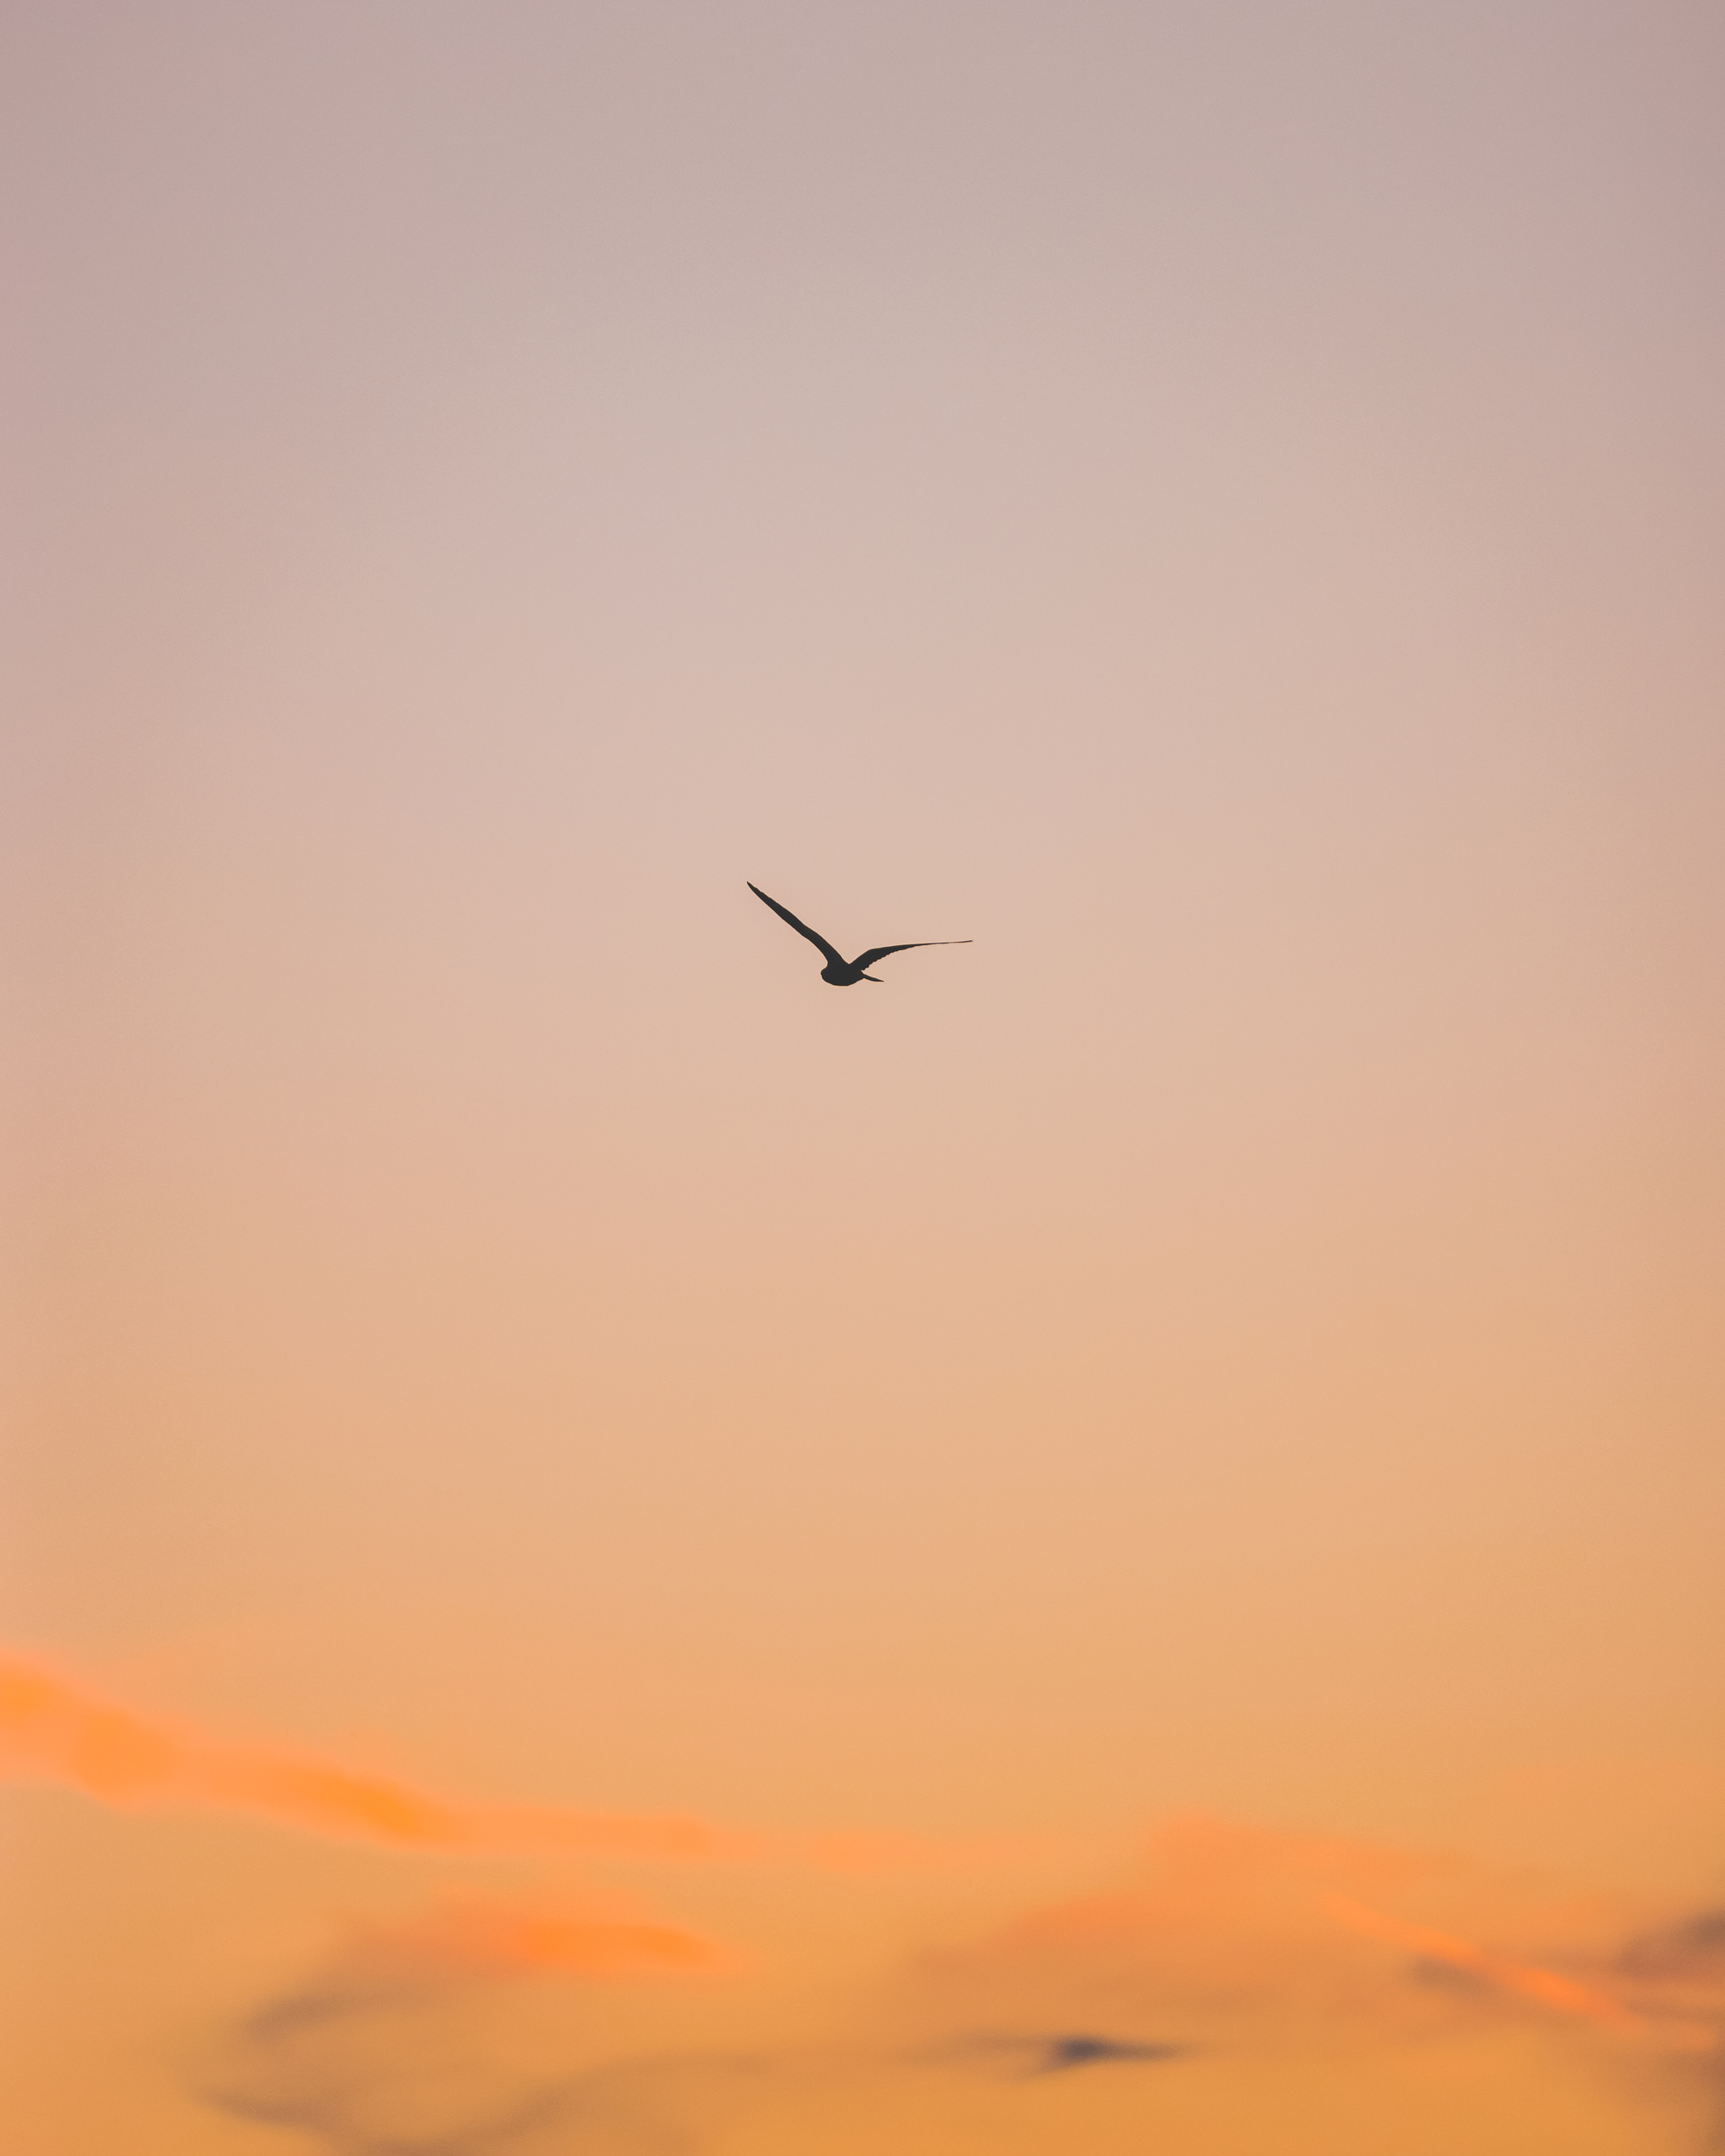 Bird Flying in the Afternoon Sky 